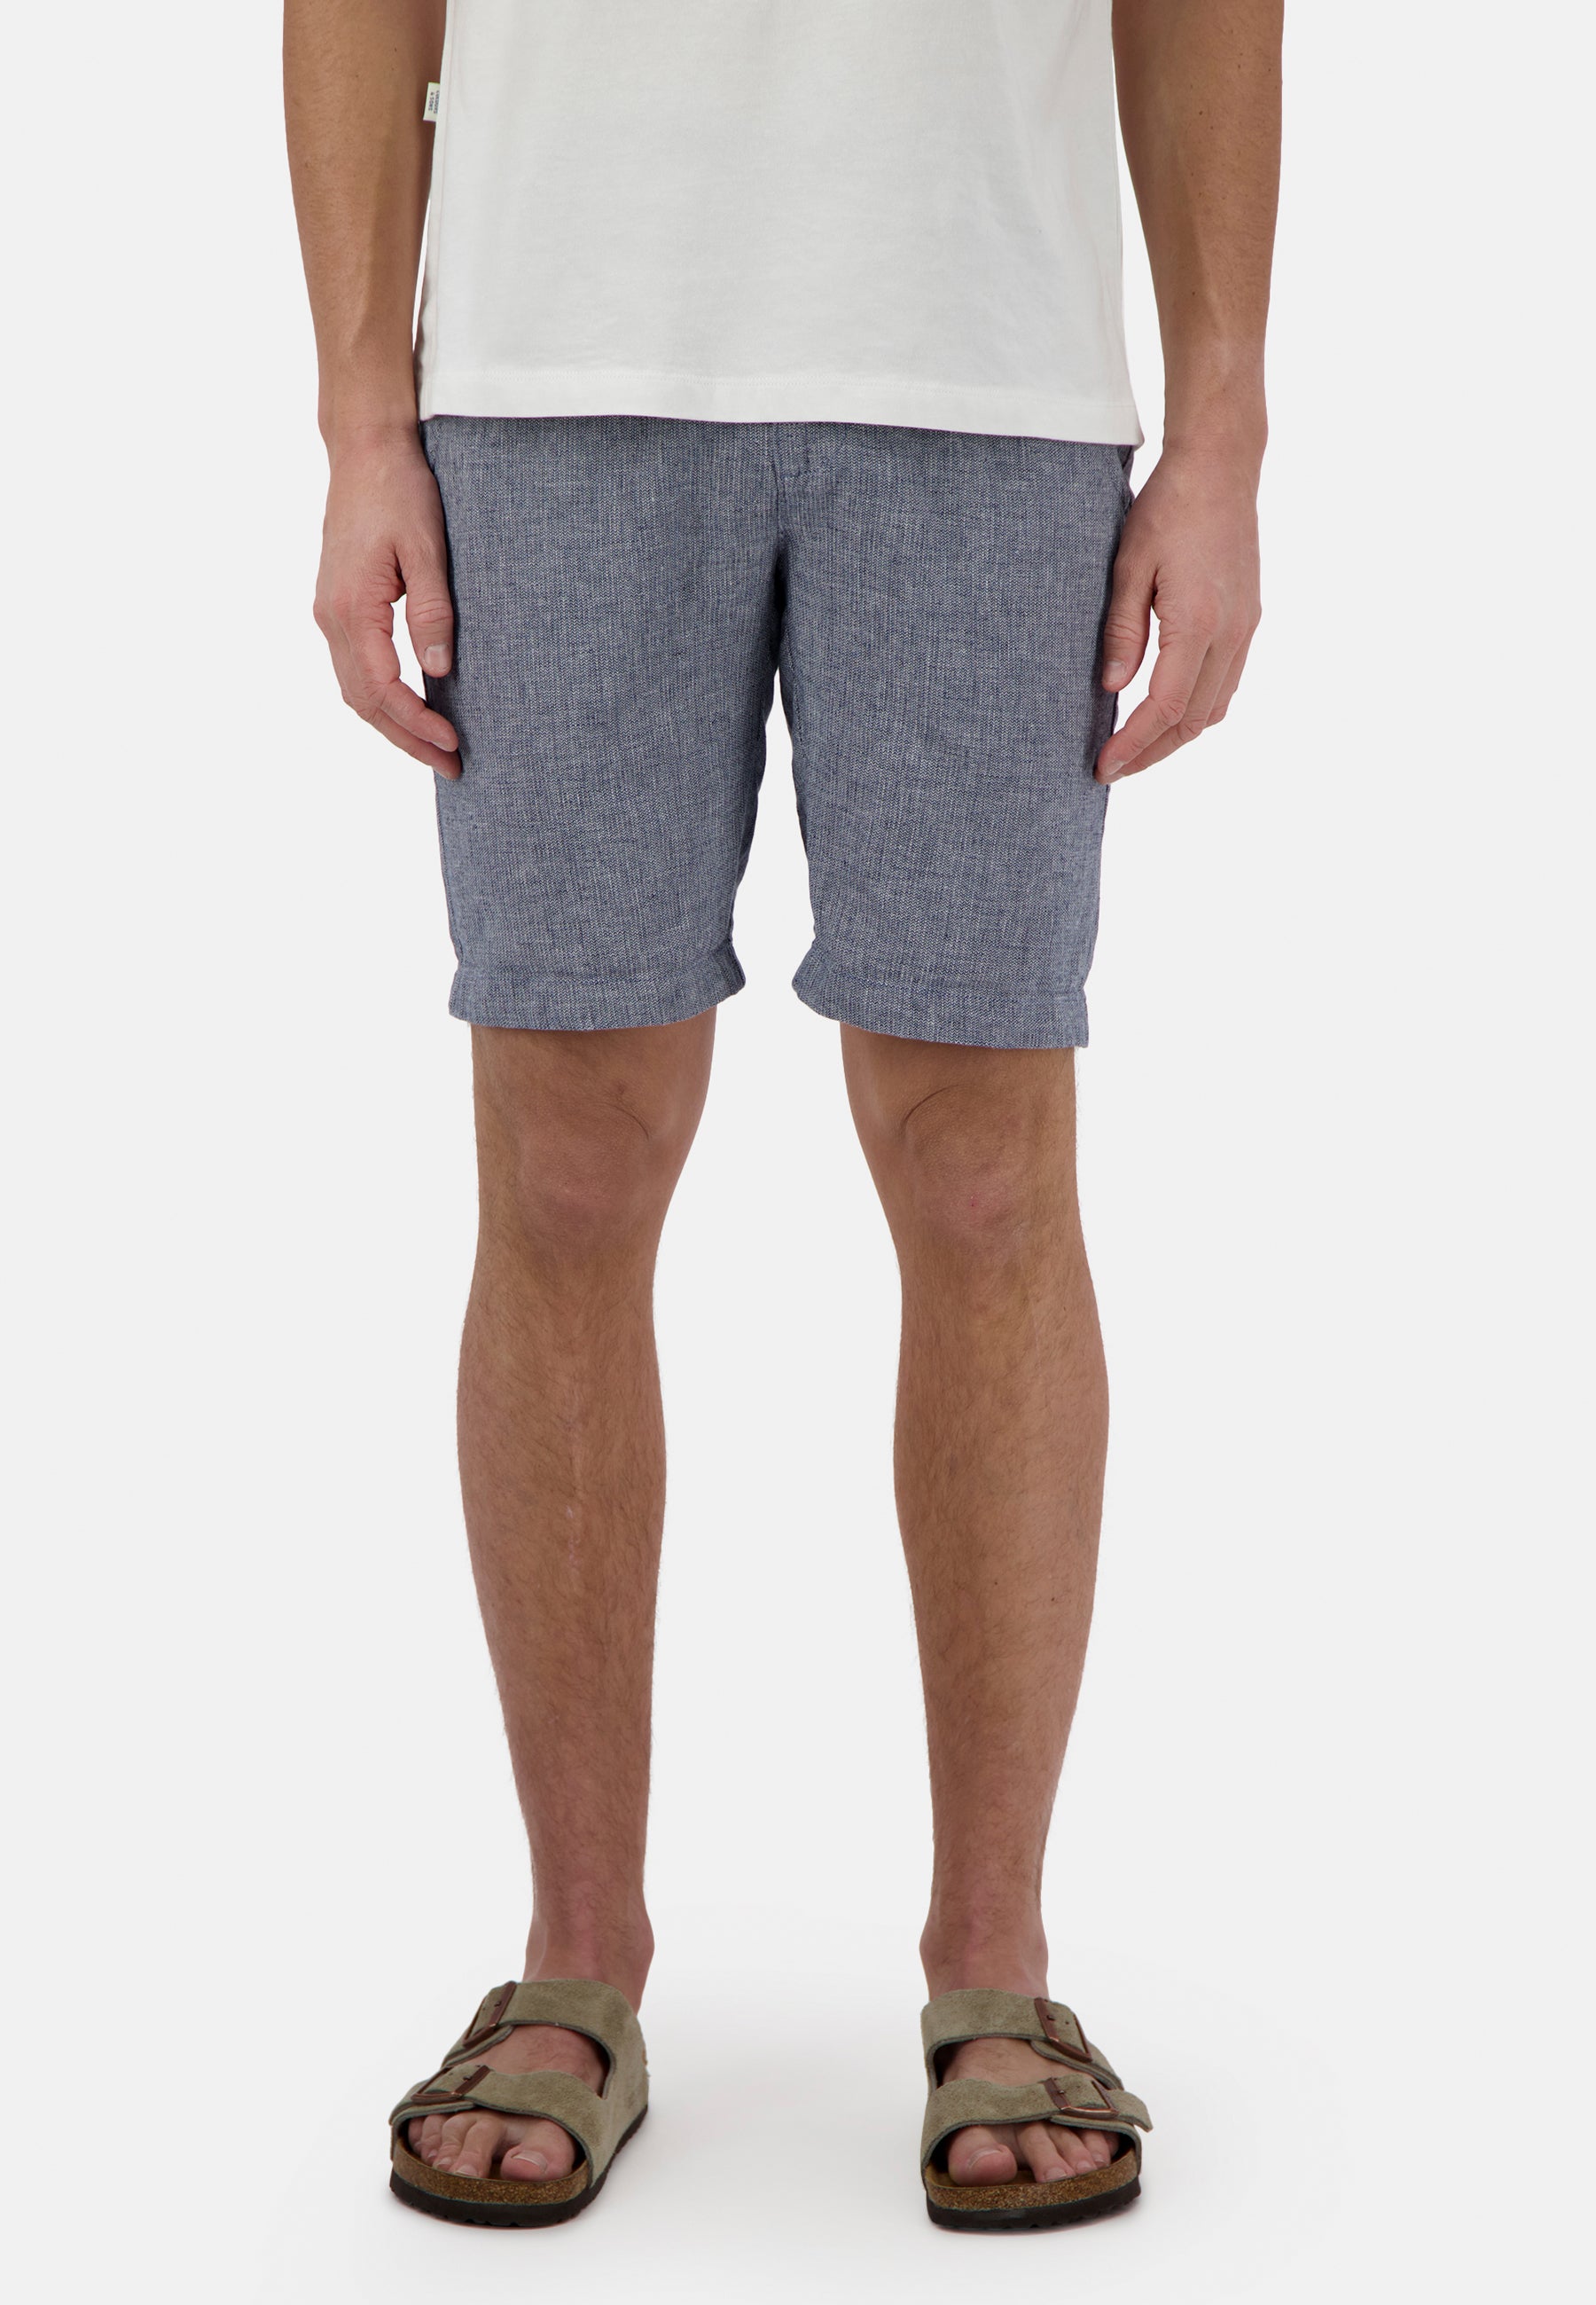 Shorts-Linen Blend Check in River Twill Shorts Colours and Sons   